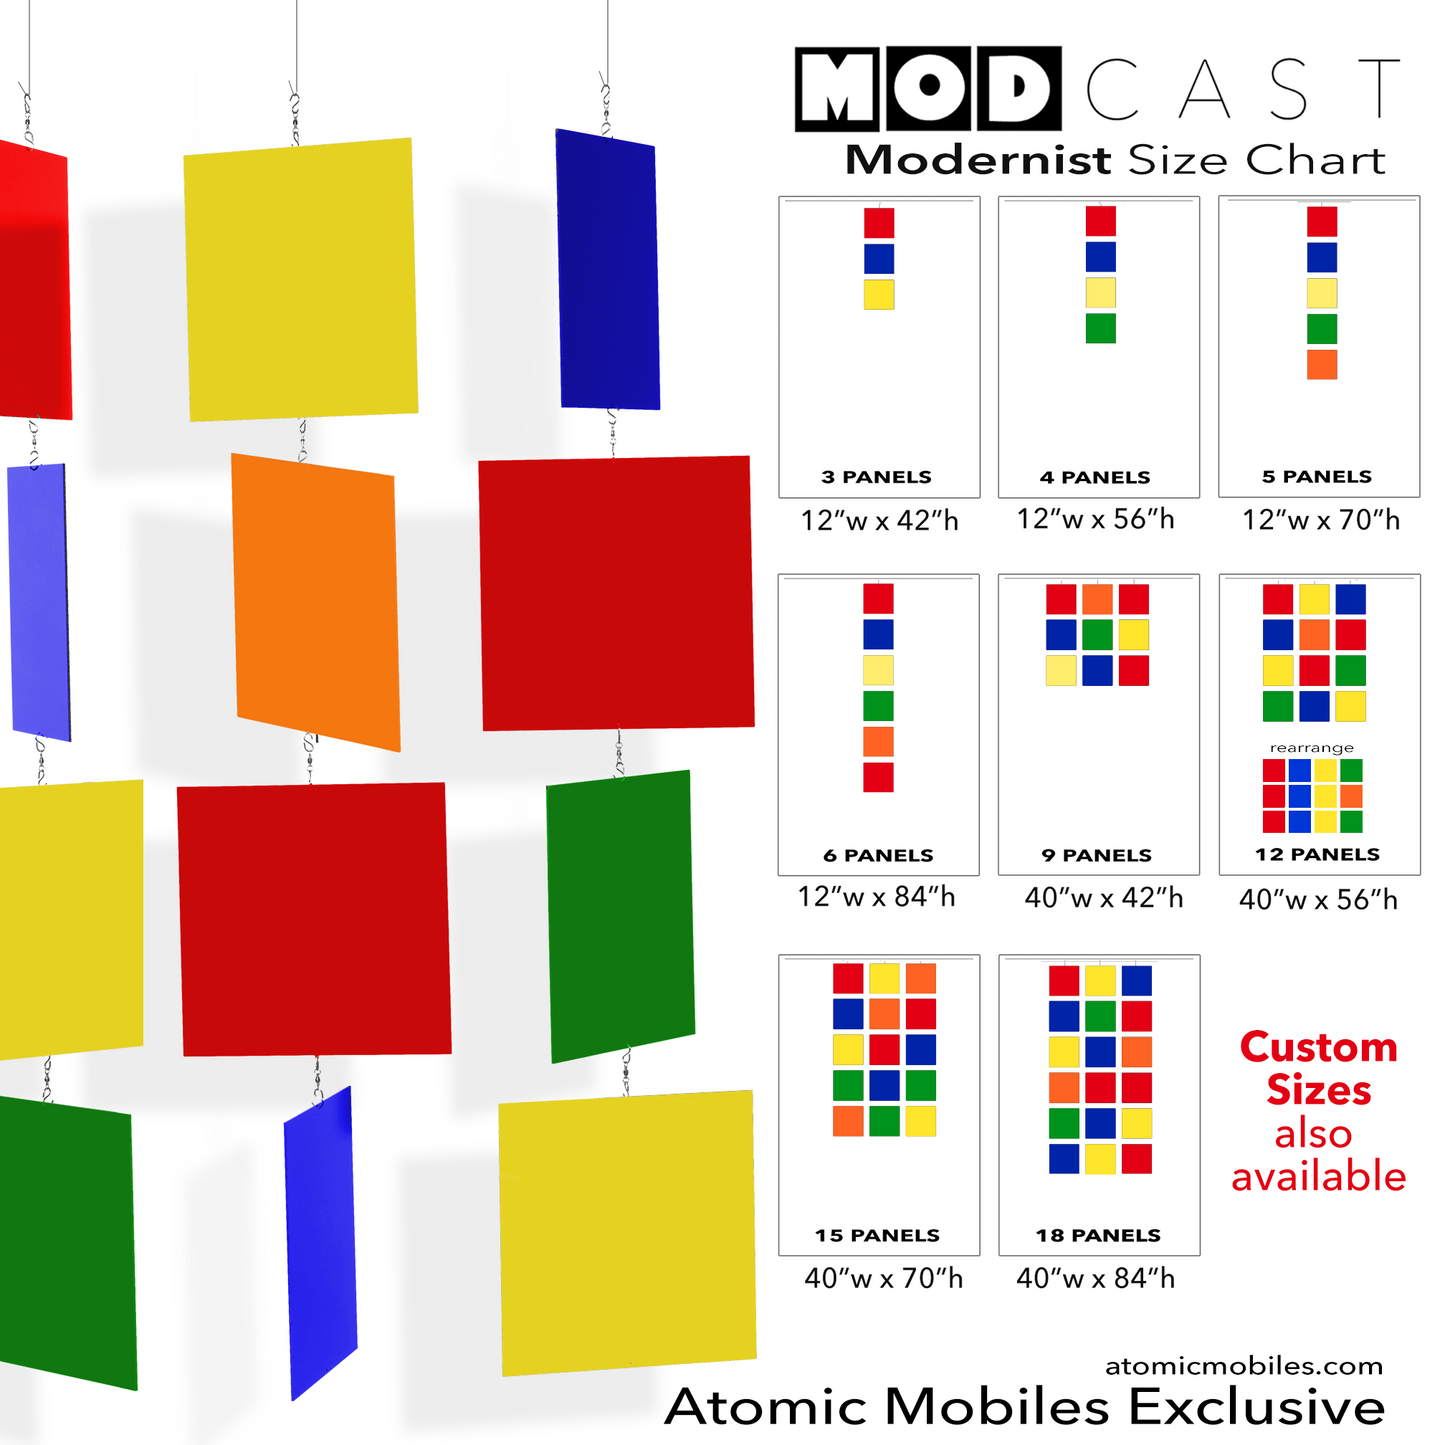 Size Chart for Modernist MODcast Hanging Art Mobiles in Red, Navy Blue, Yellow, Green, and Orange  - mid century modern style kinetic art by AtomicMobiles.com